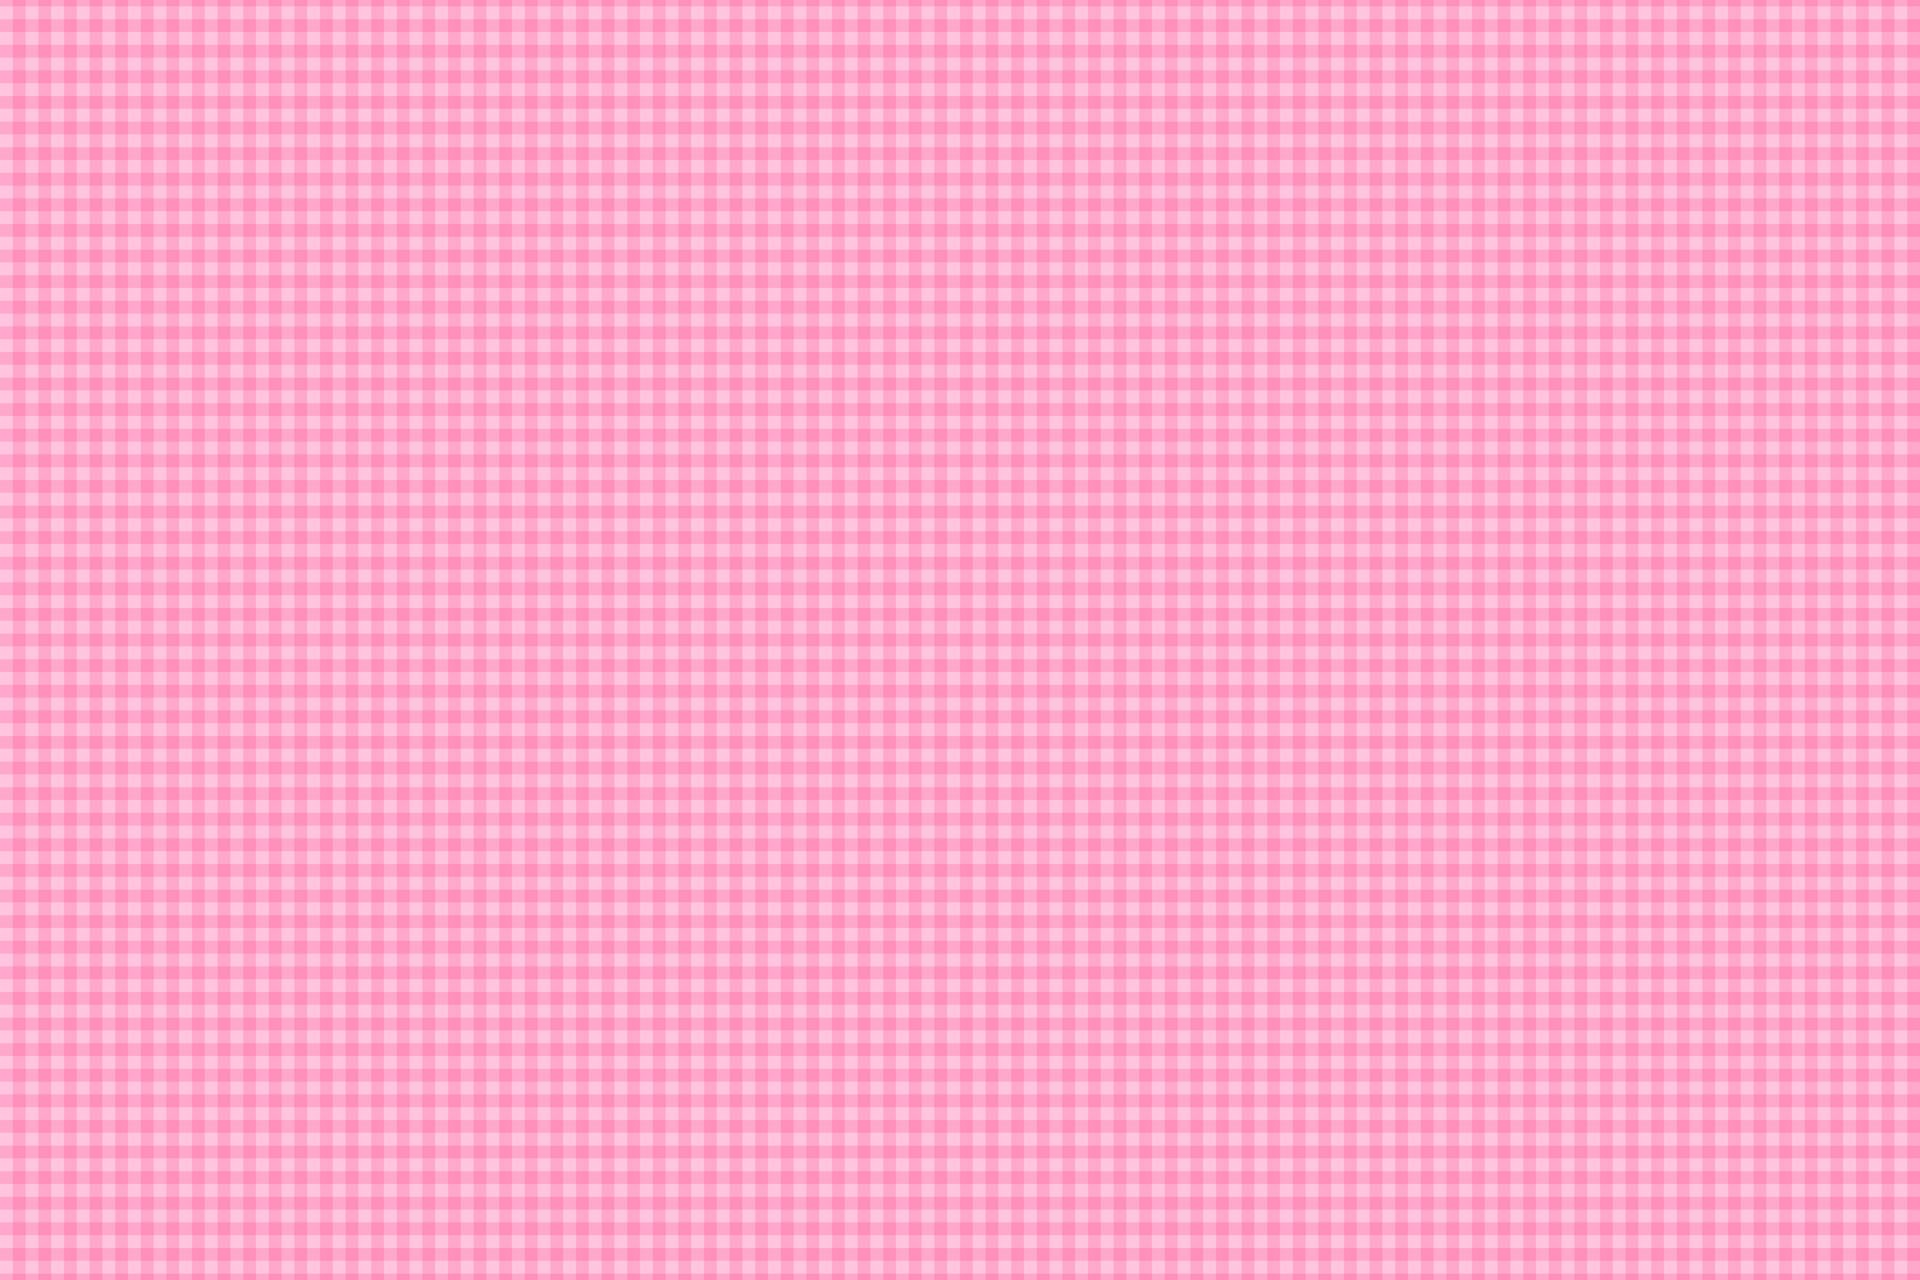 A pink checkered background with white lines - Soft pink